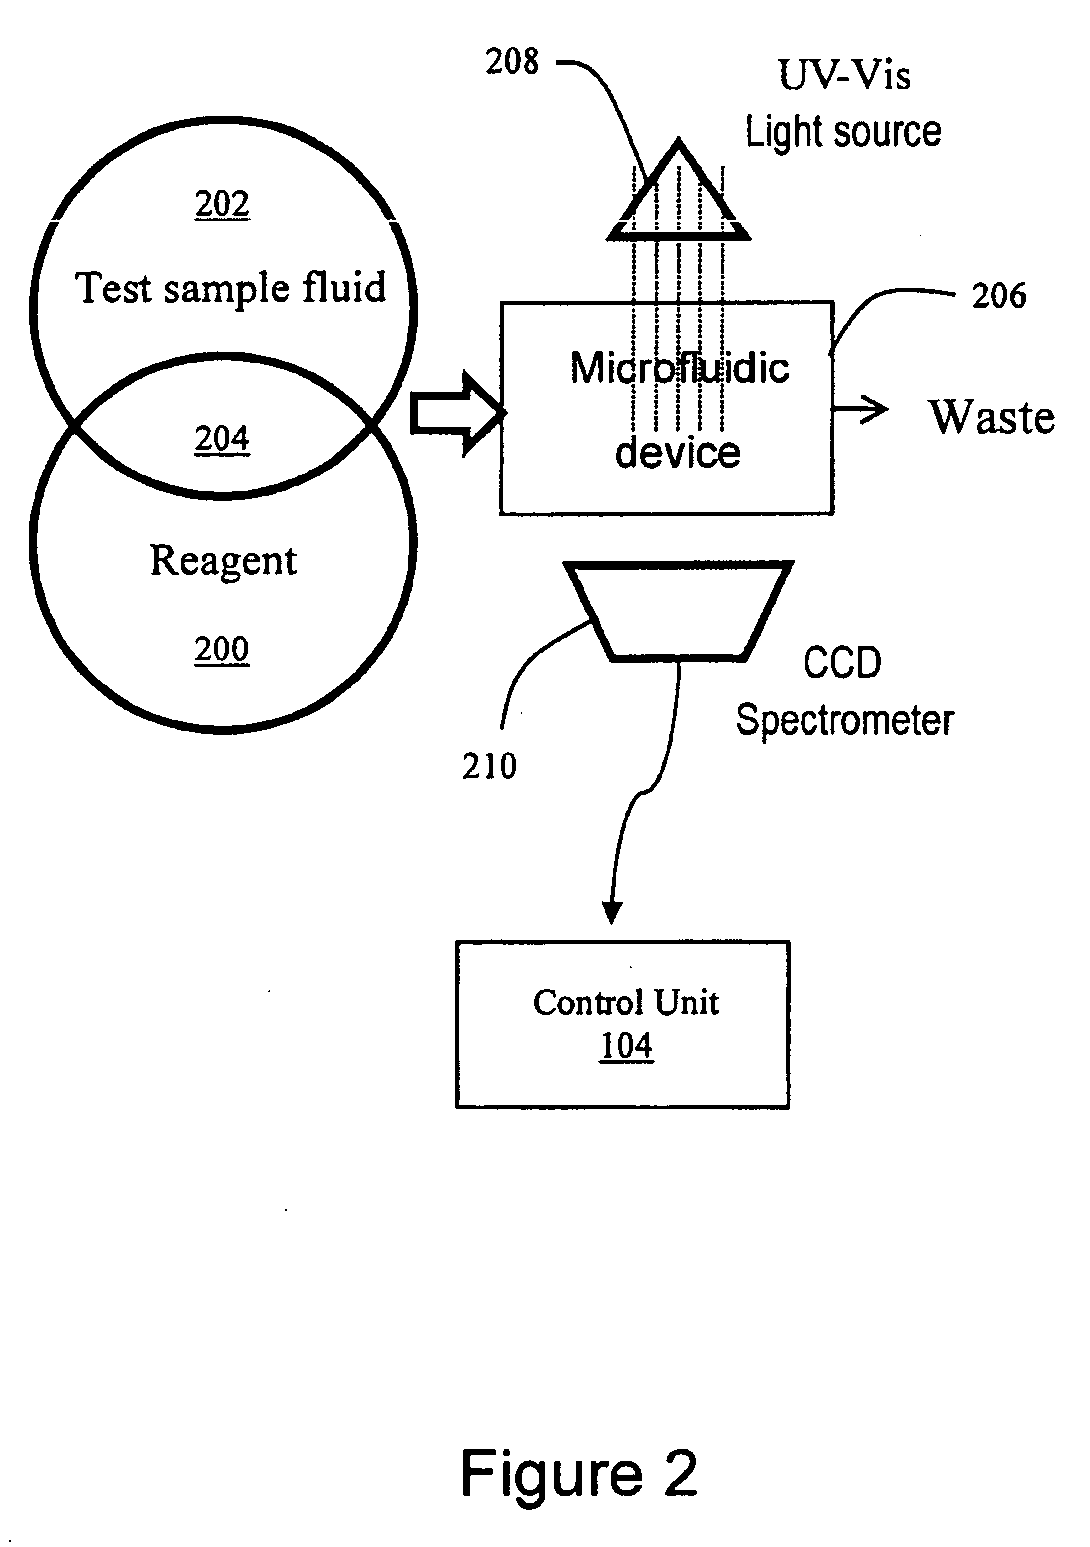 Detecting gas compounds for downhole fluid analysis using microfluidics and reagent with optical signature